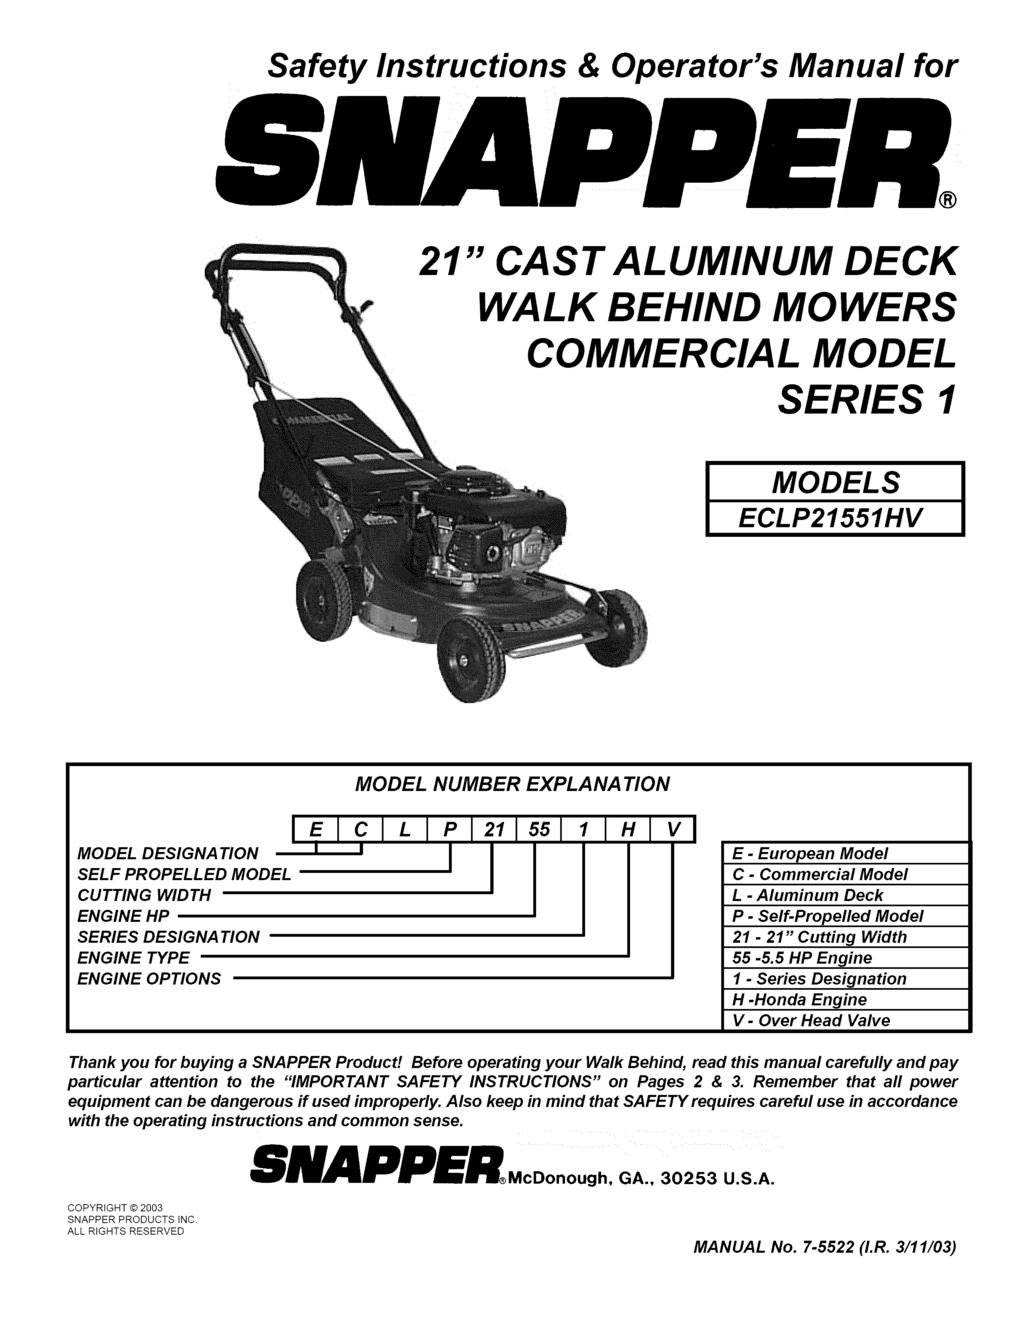 Safety Instructions & Operator's Manual for 21" CAST ALUMINUM DECK WALK BEHIND MOWERS COMMERCIAL MODEL SERIES 1 MODELS ECLP21551HV MODEL NUMBER EXPLANATION I E C L P 21 55 ' Ir!